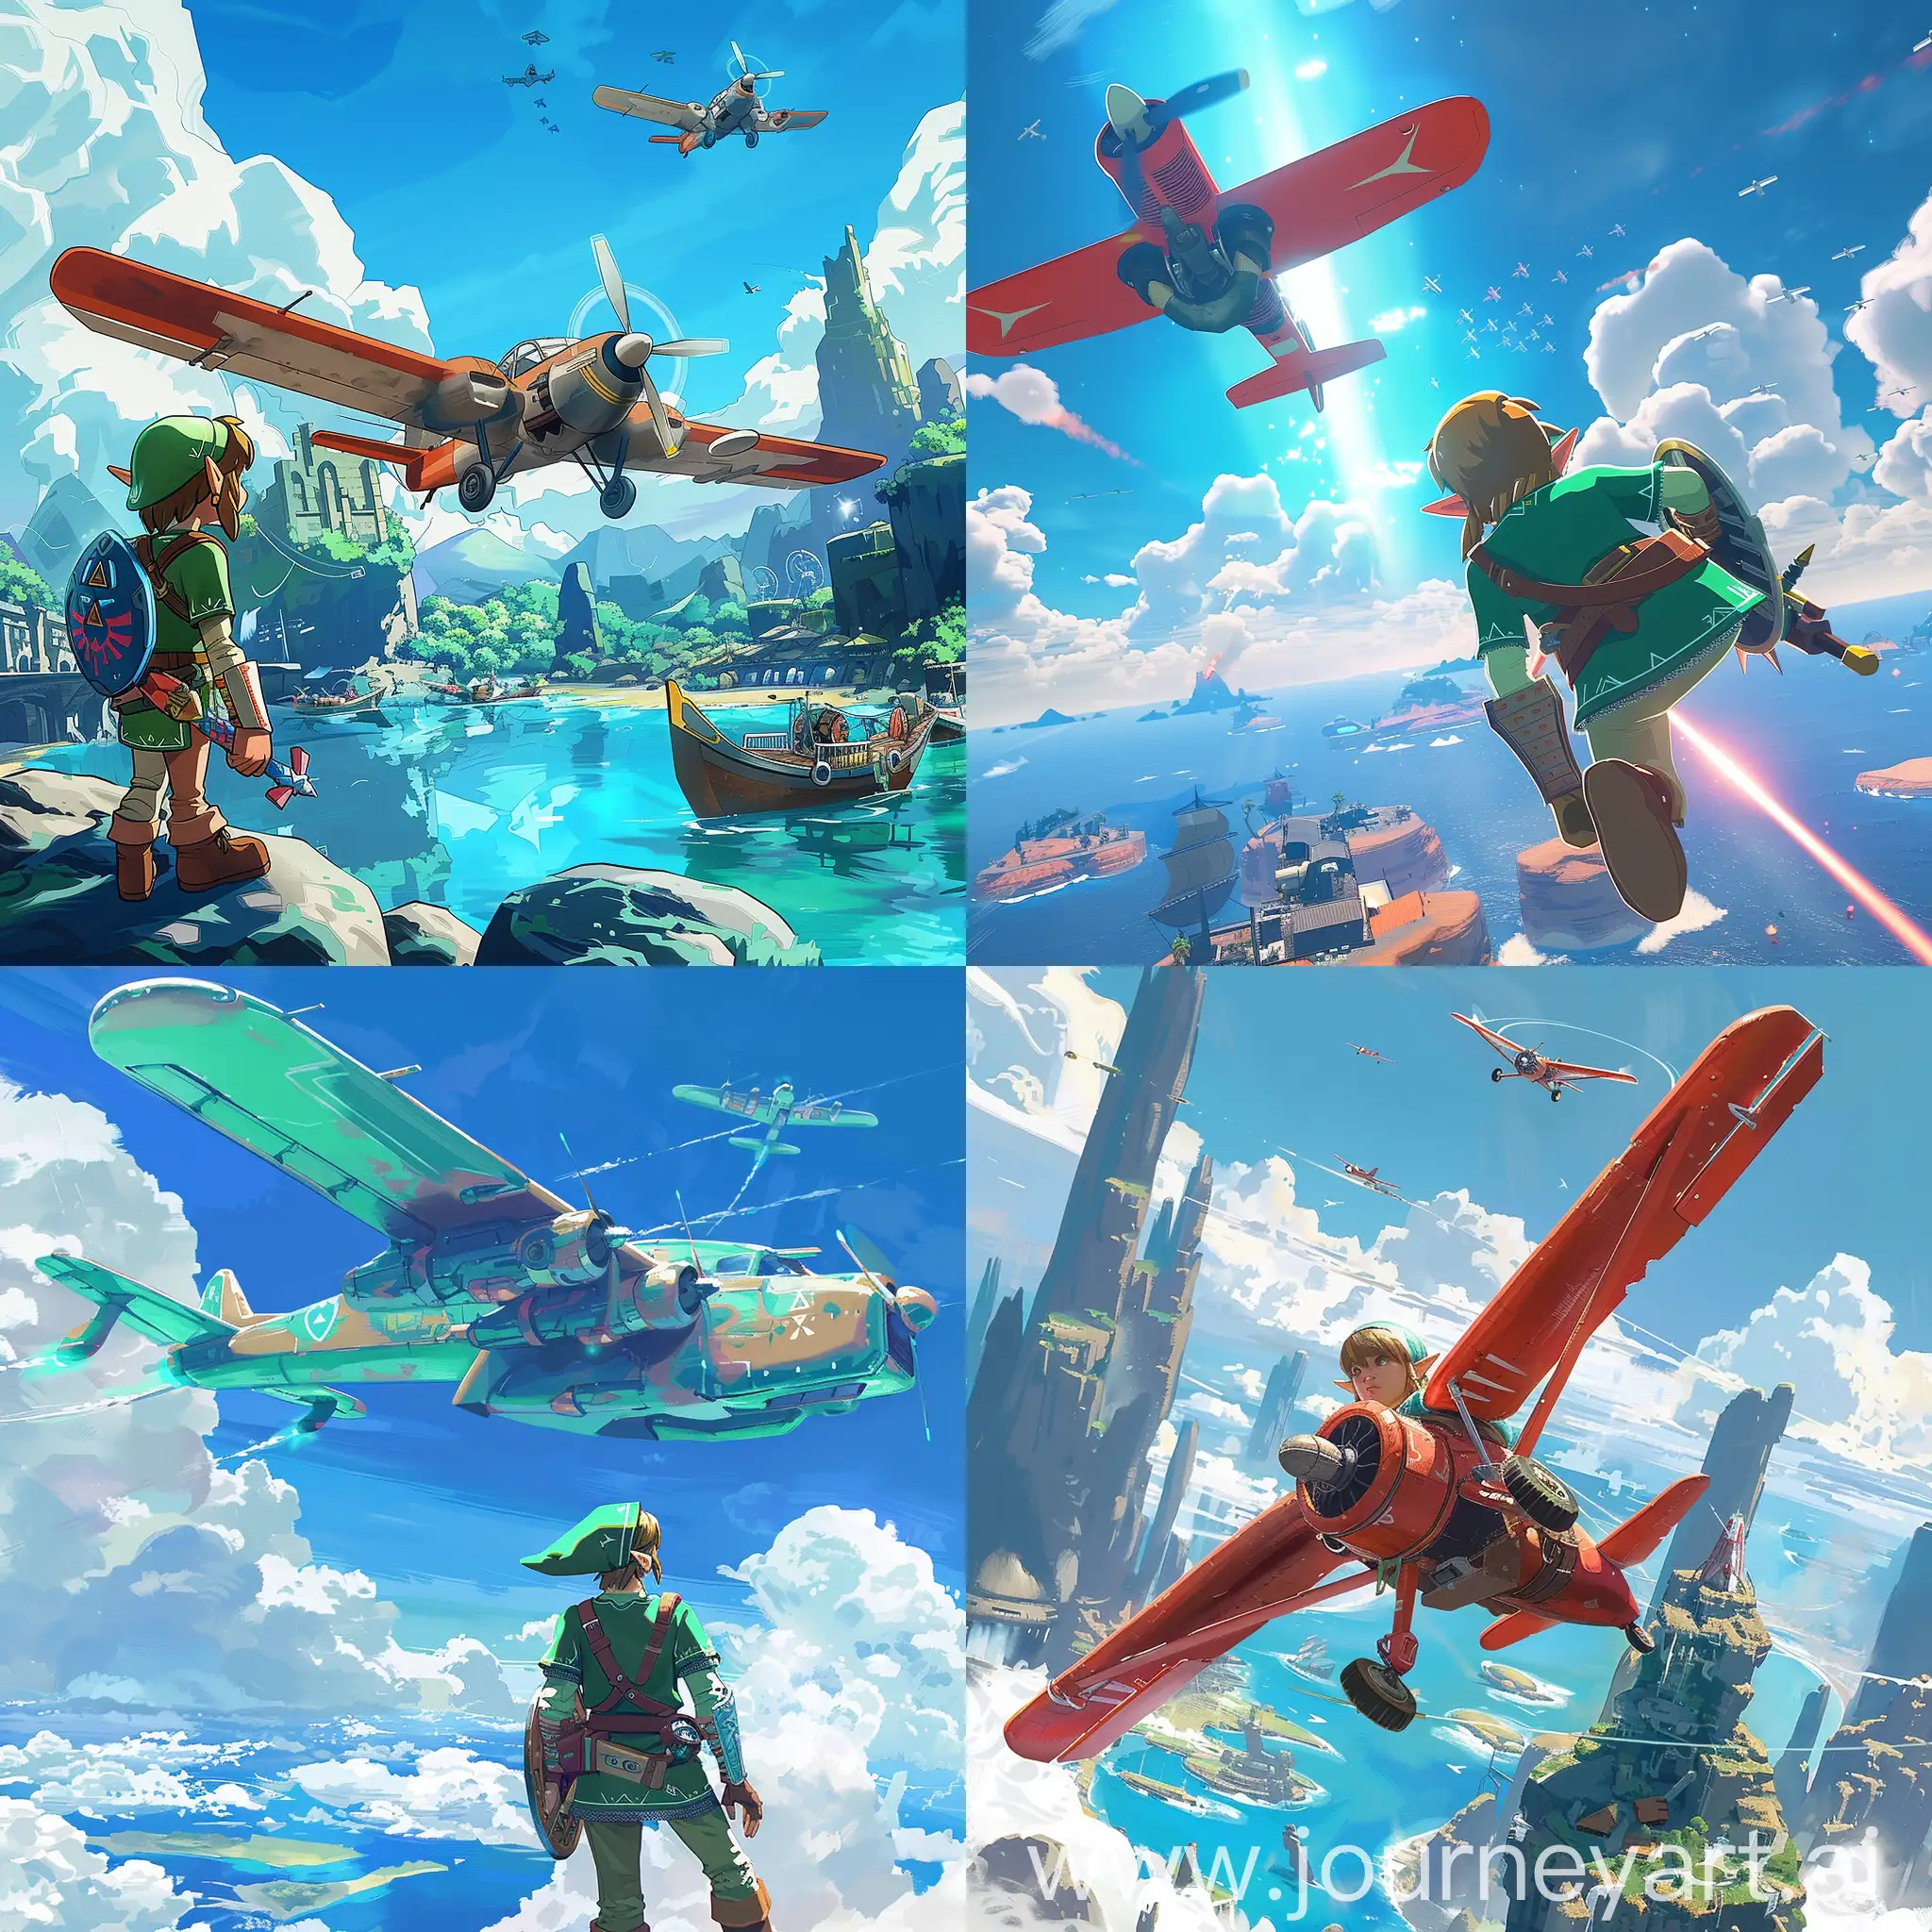 Zelda Windwaker style game in a solarpunk universe with planes instead of boats